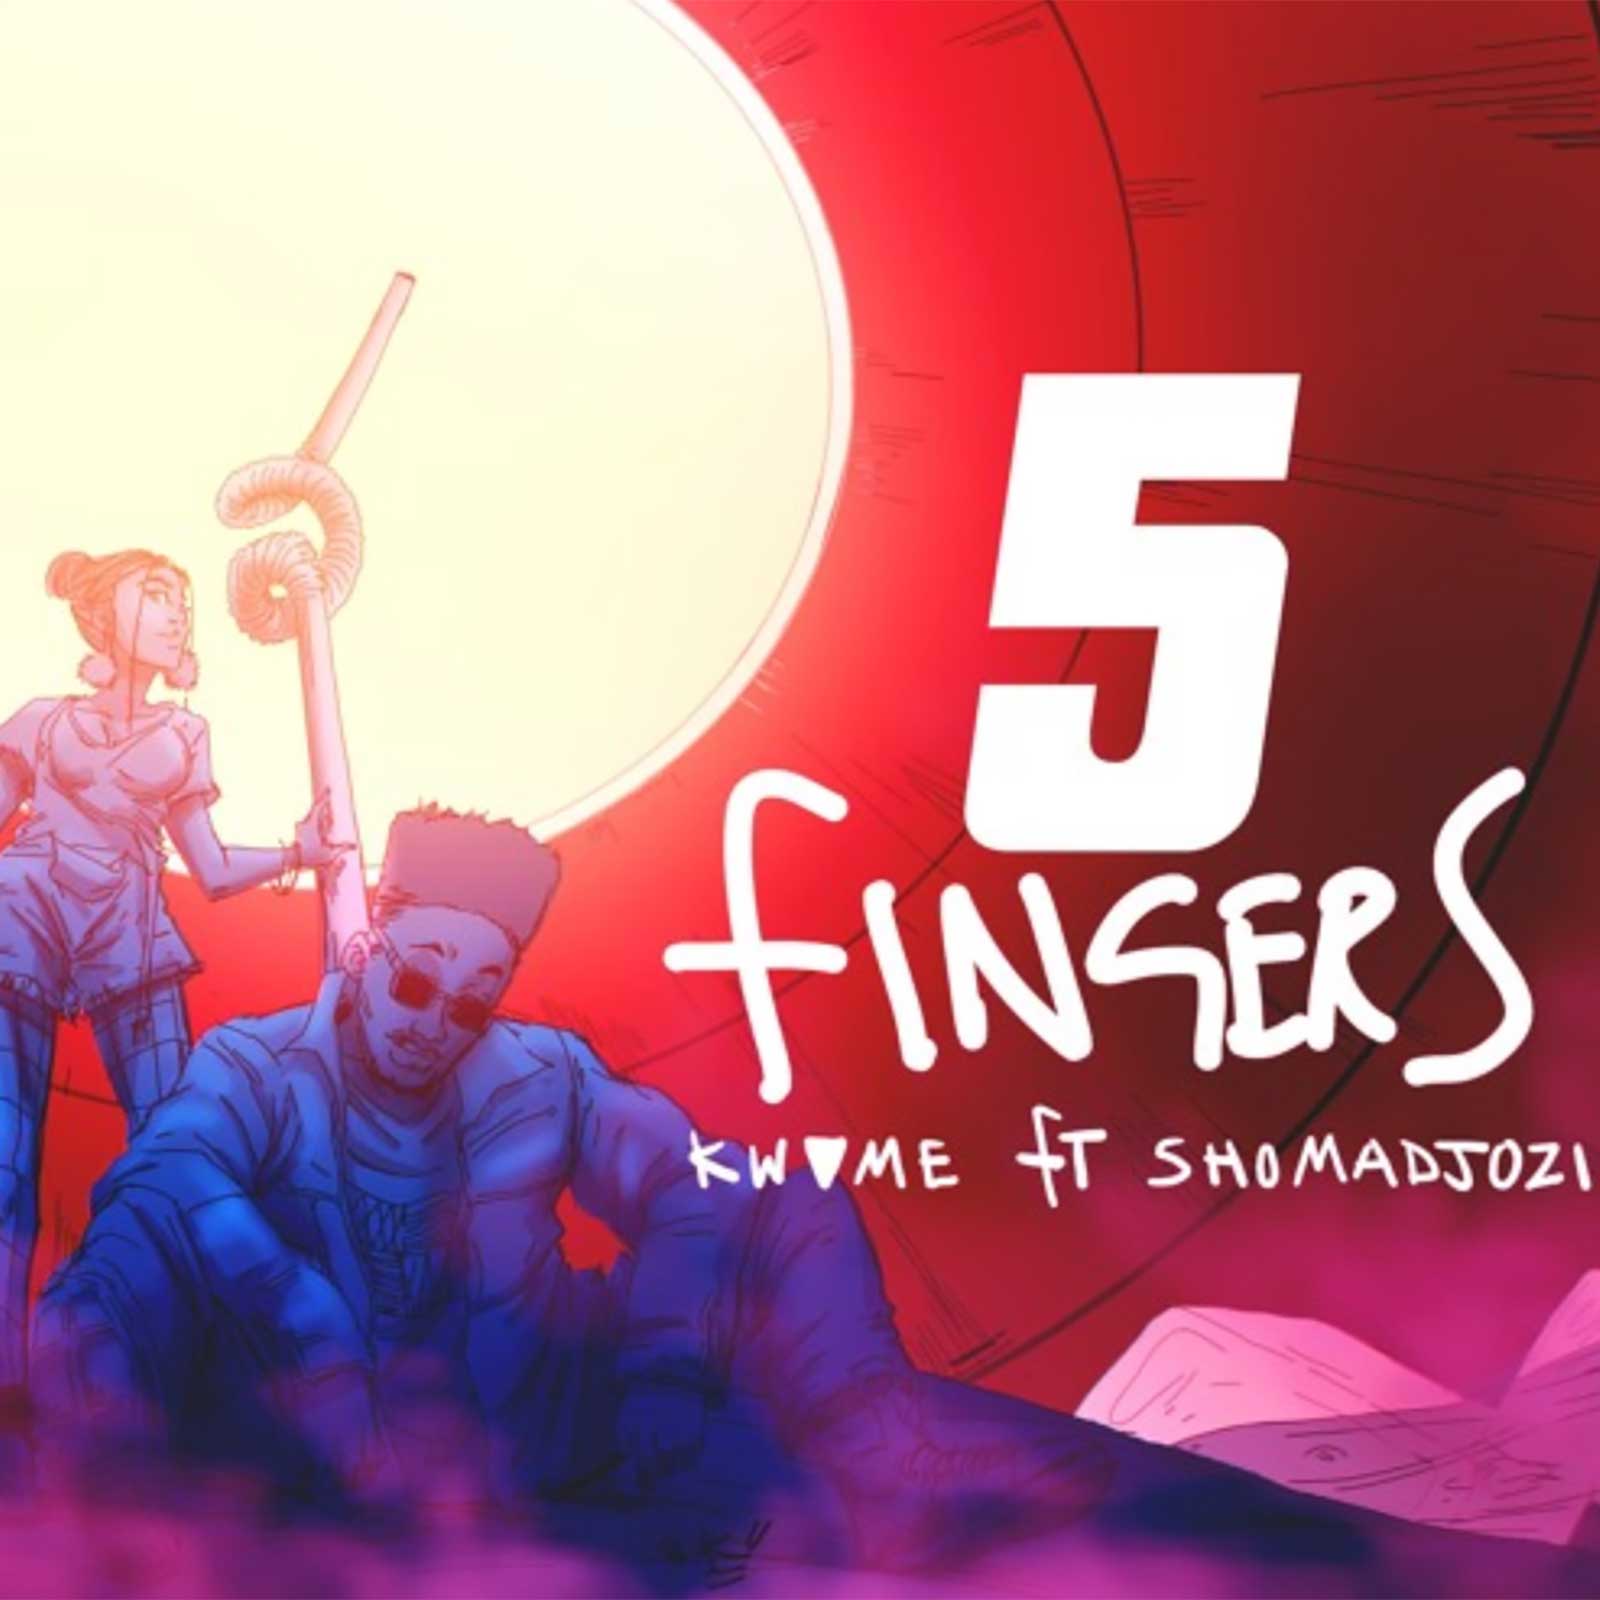 5 Fingers by Kwame ft. Sho Madjozi